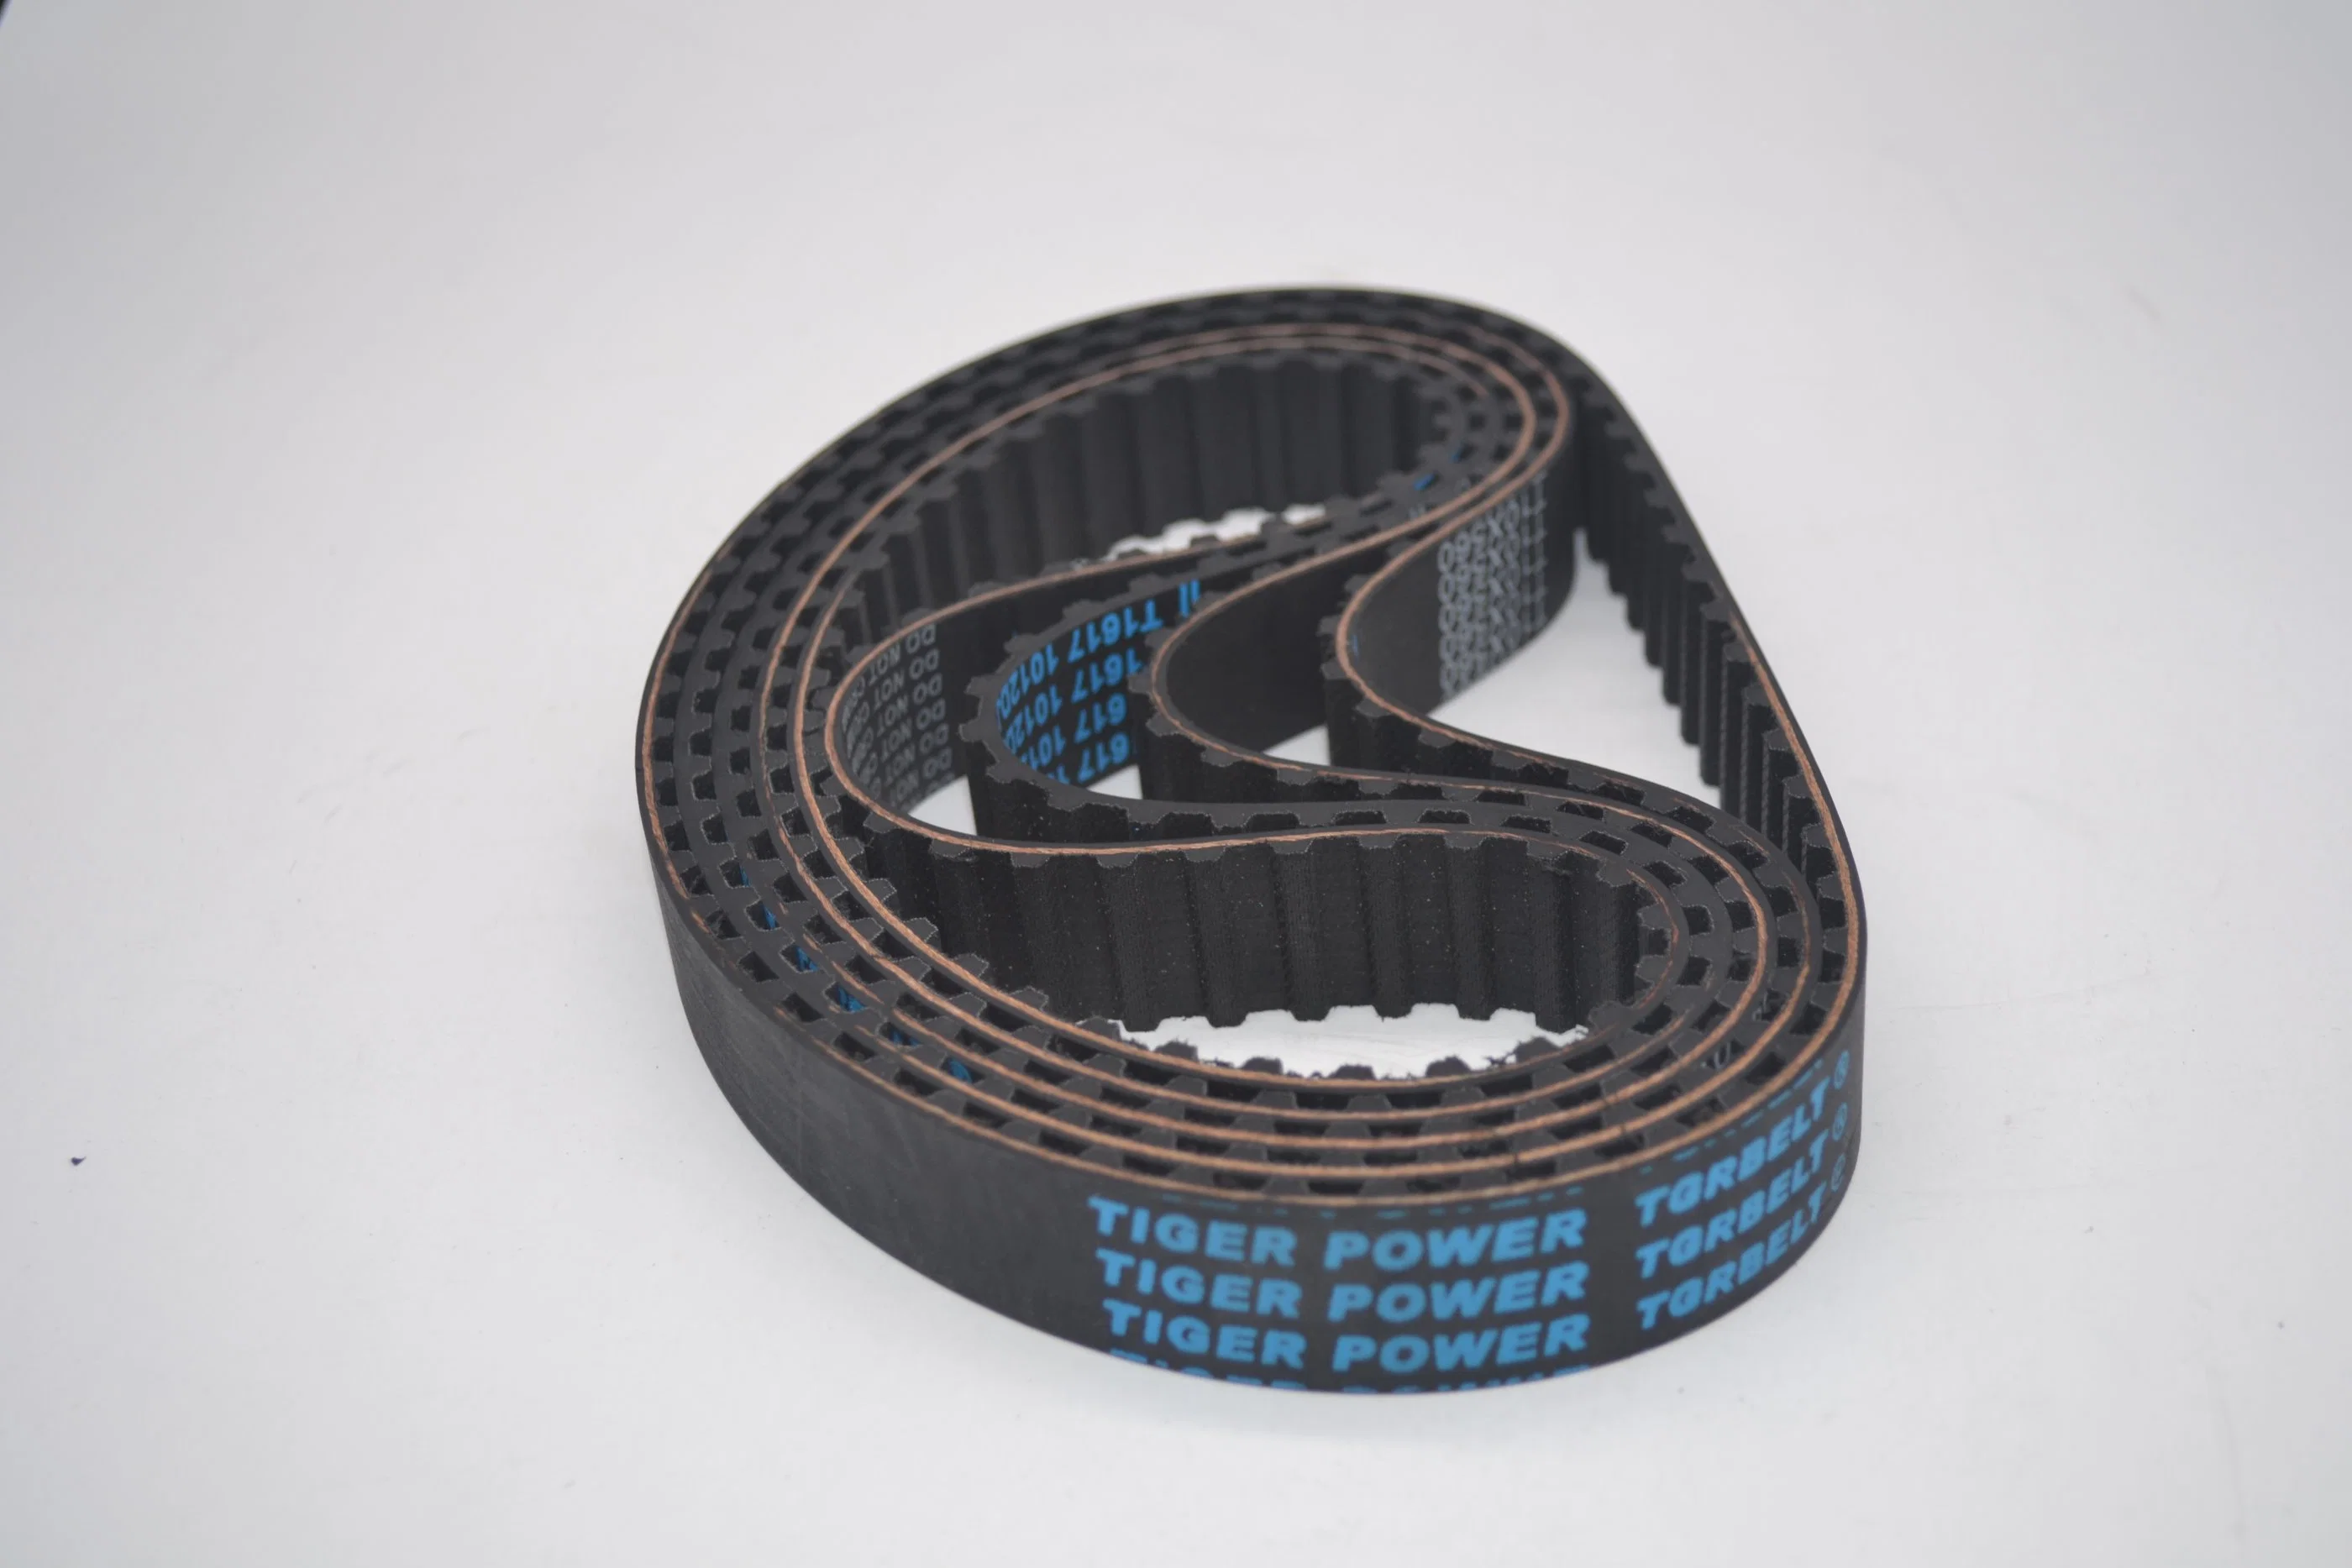 T10 Synchronization Customized Teeth Rubber Timing Bands for Electronic Accessories and Agricultural Printing Machine